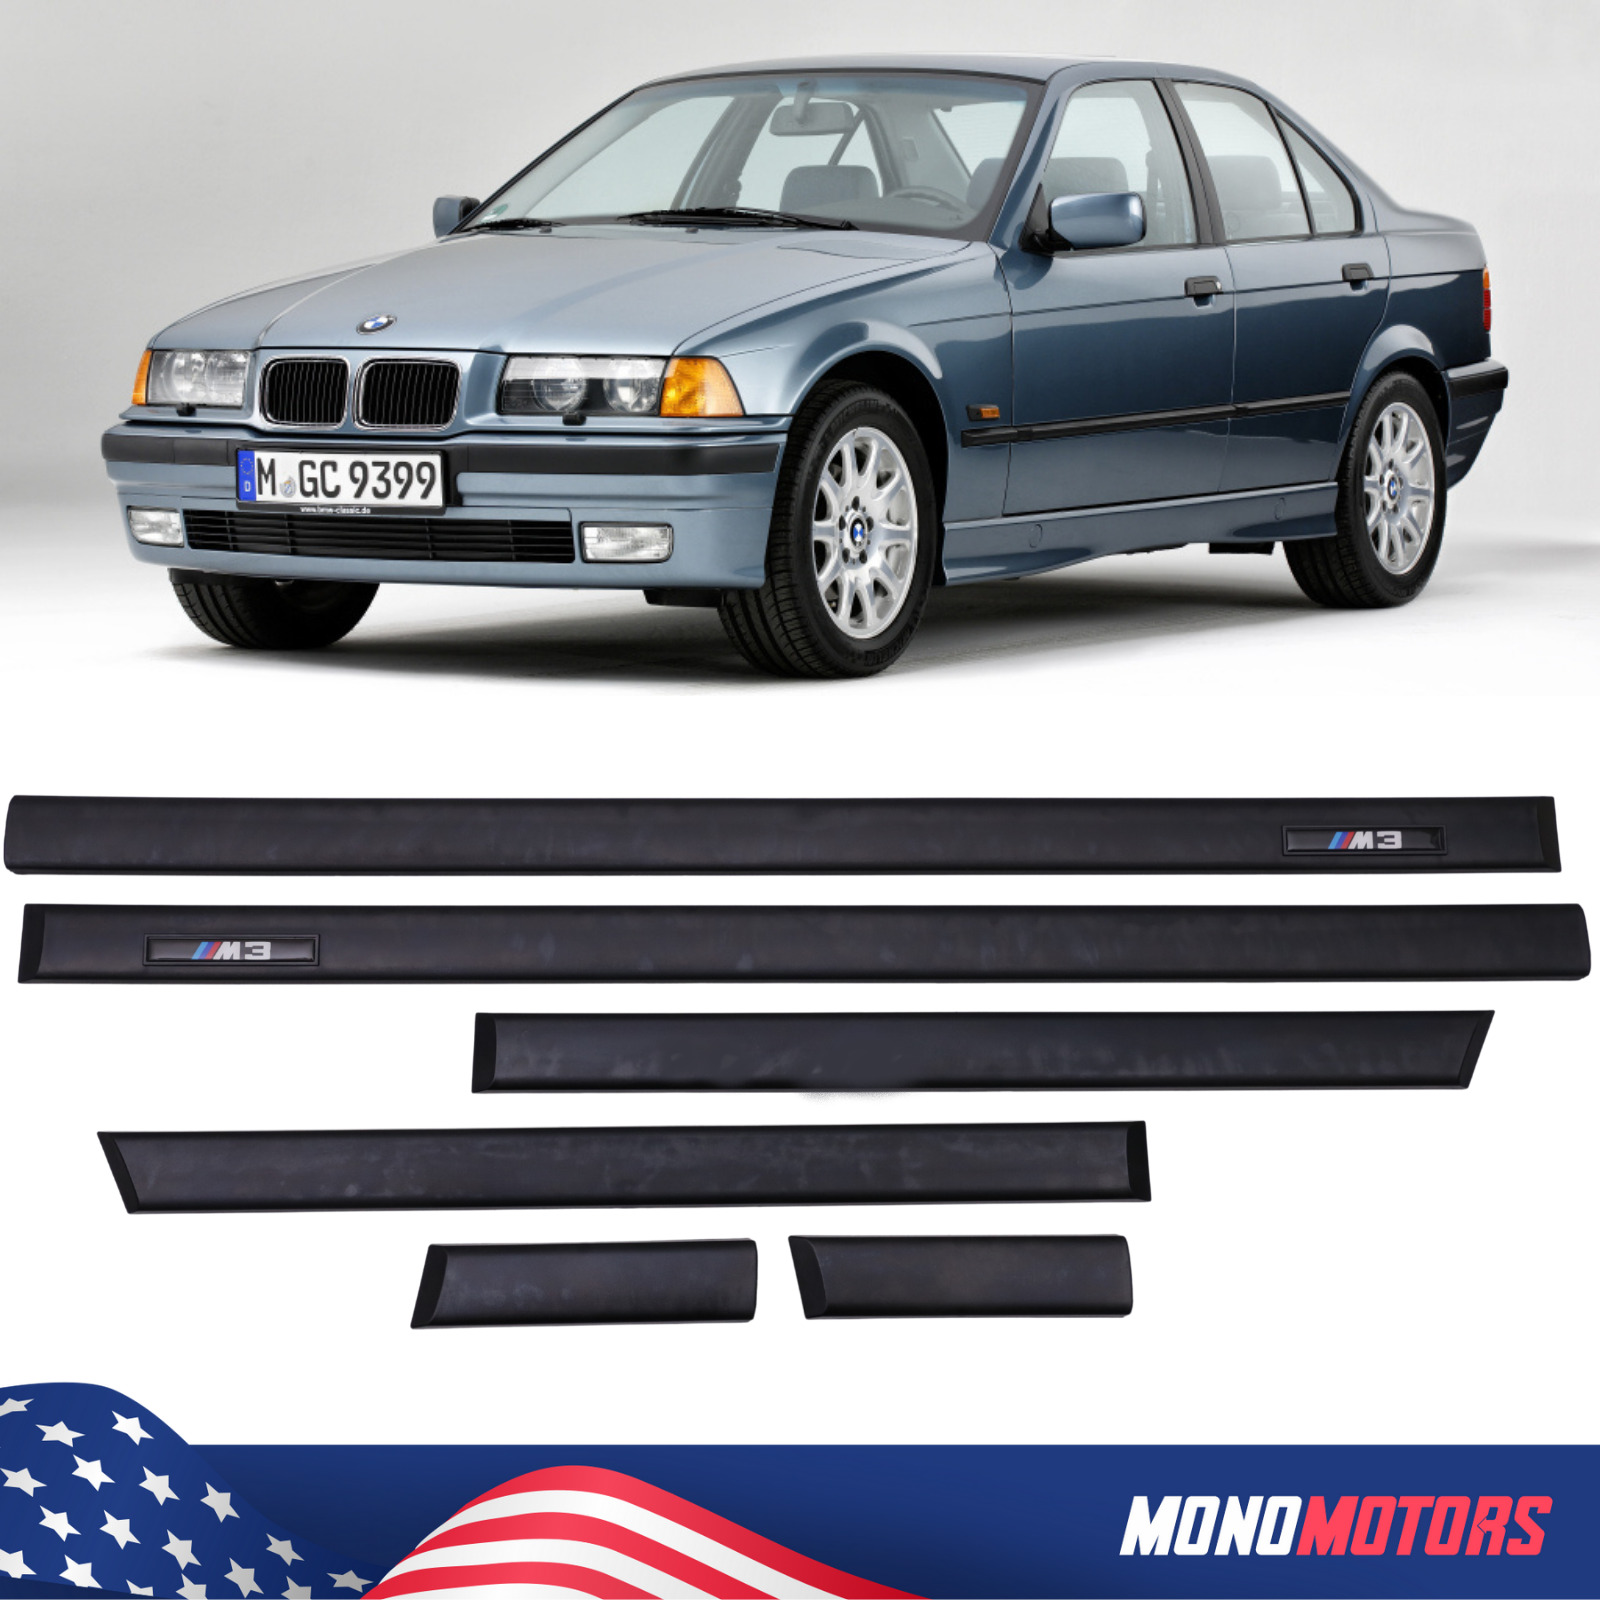 BODY SIDE MOULDING TRIM For BMW E36 M3 STYLE 3 SERIES SEDAN FREE FAST SHIPPING